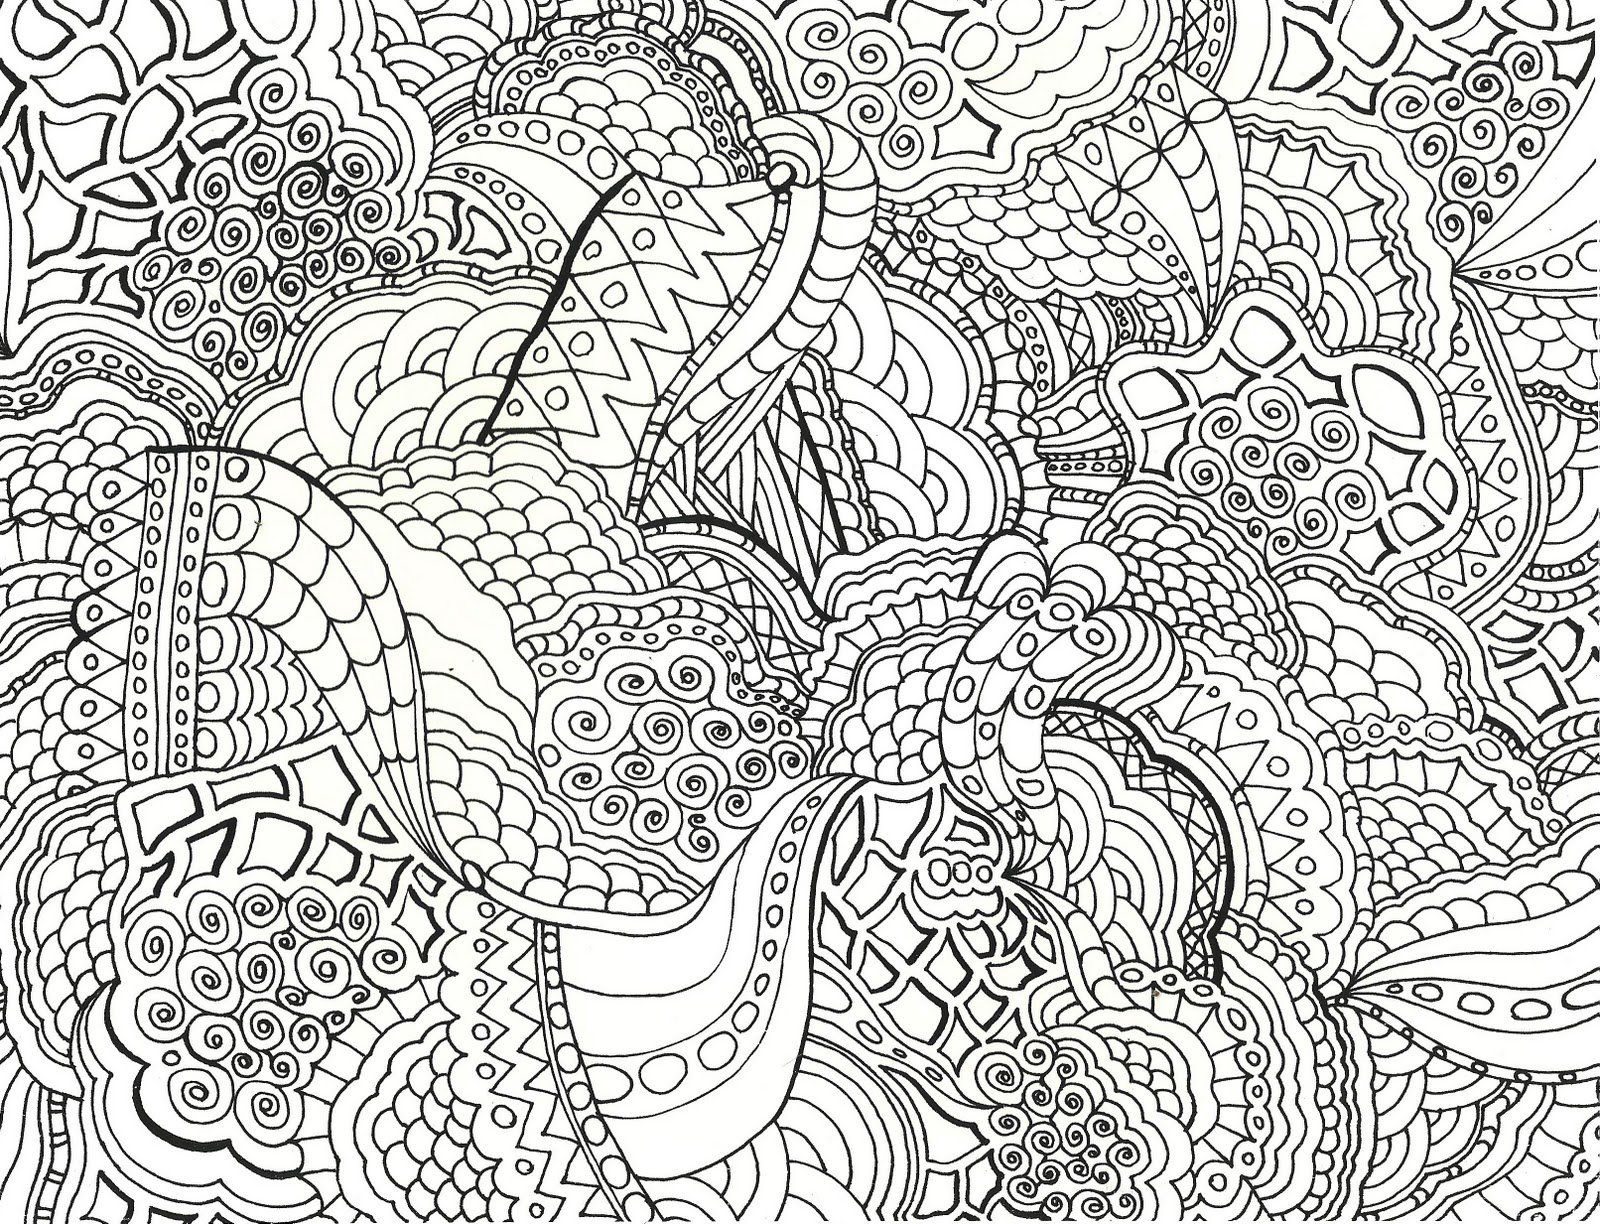 Printable Zentangle - Coloring Pages for Kids and for Adults